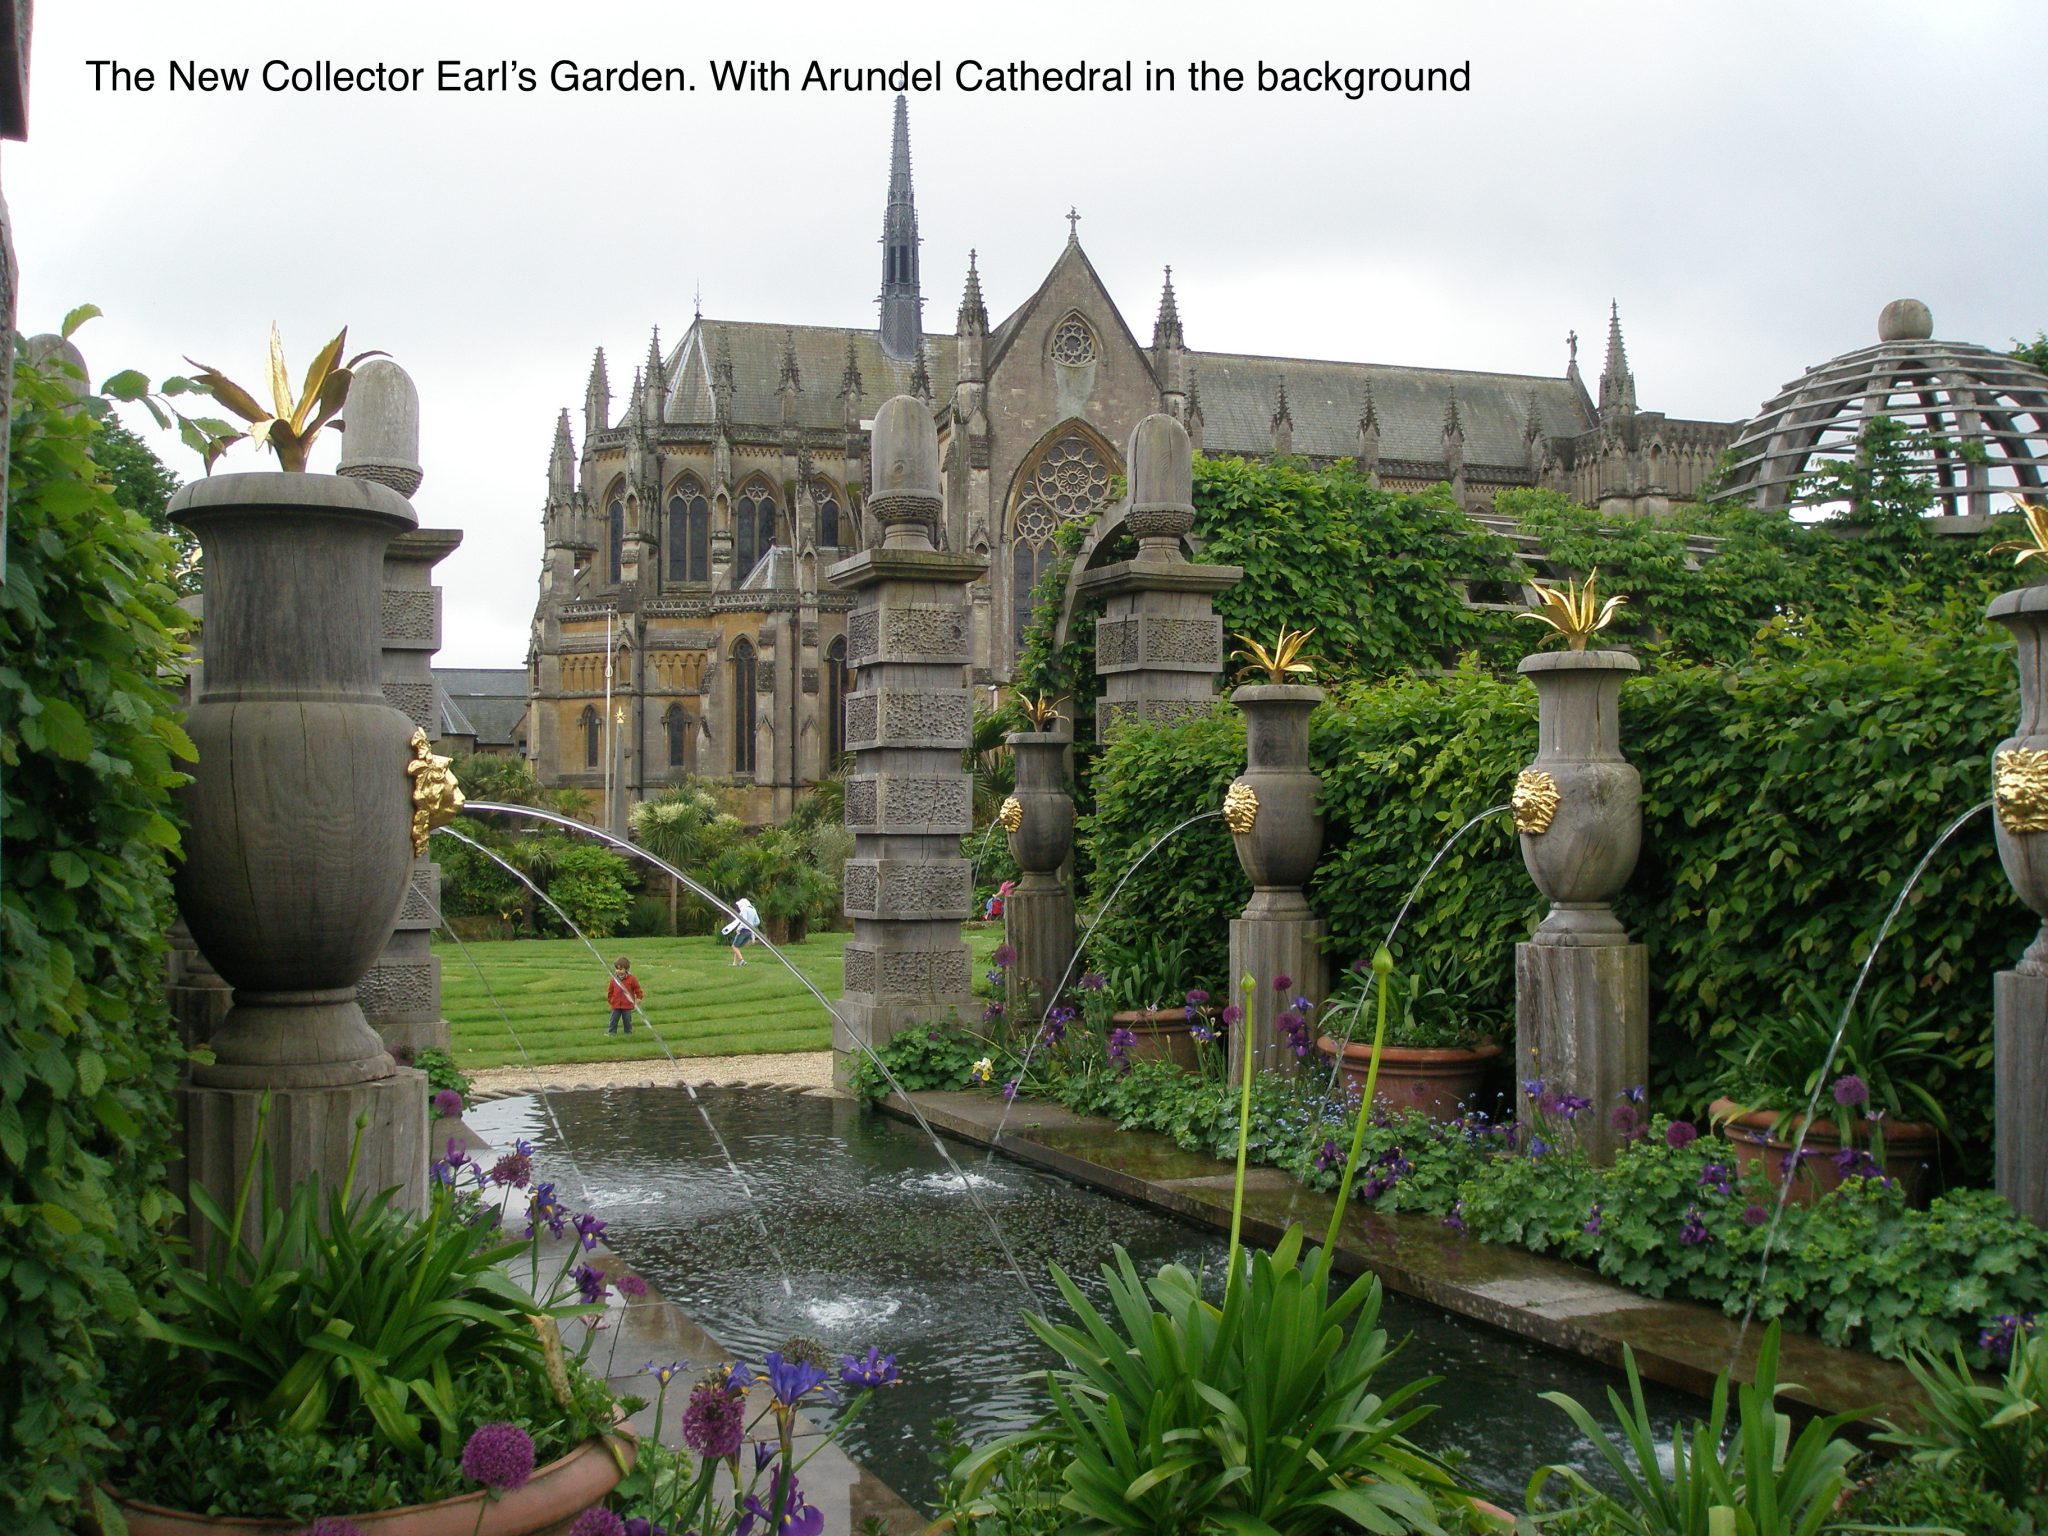 The Water Garden, with a grass Labyrinth ( and Arundel Cathedral, in the background)